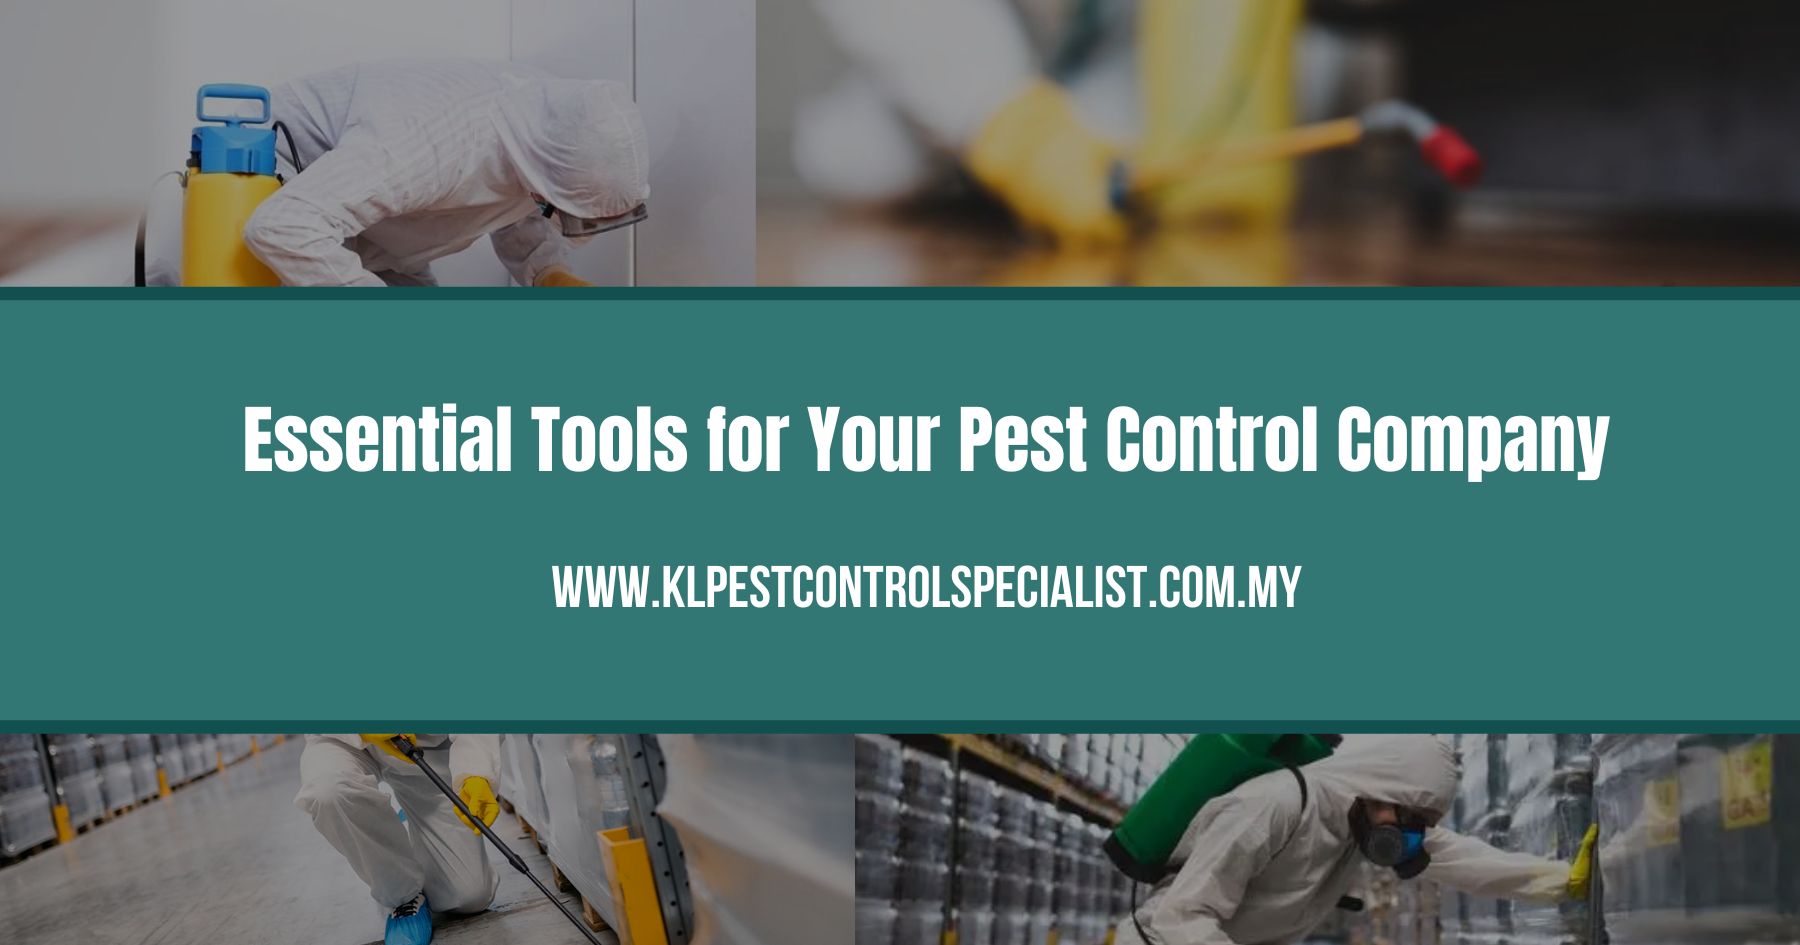 Essential Tools for Your Pest Control Company